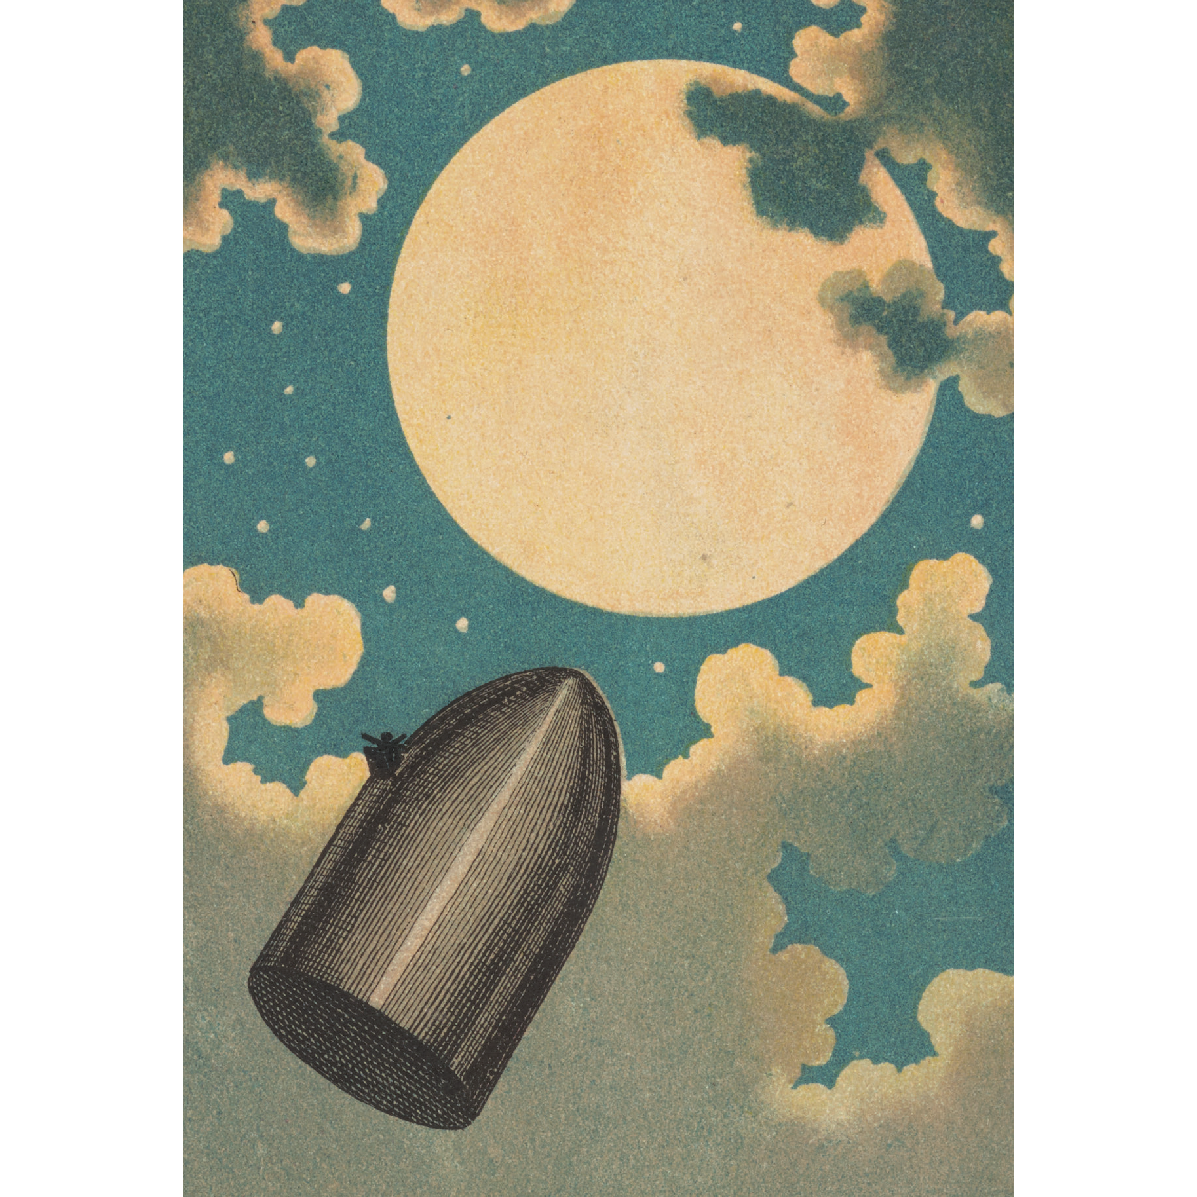 Greeting card - portrait format. Illustration of a black/silver projectile heading to a full moon, against a blue sky with clouds and stars. From the collection of Cambridge University Library, brought to you by CuratingCambridge.com